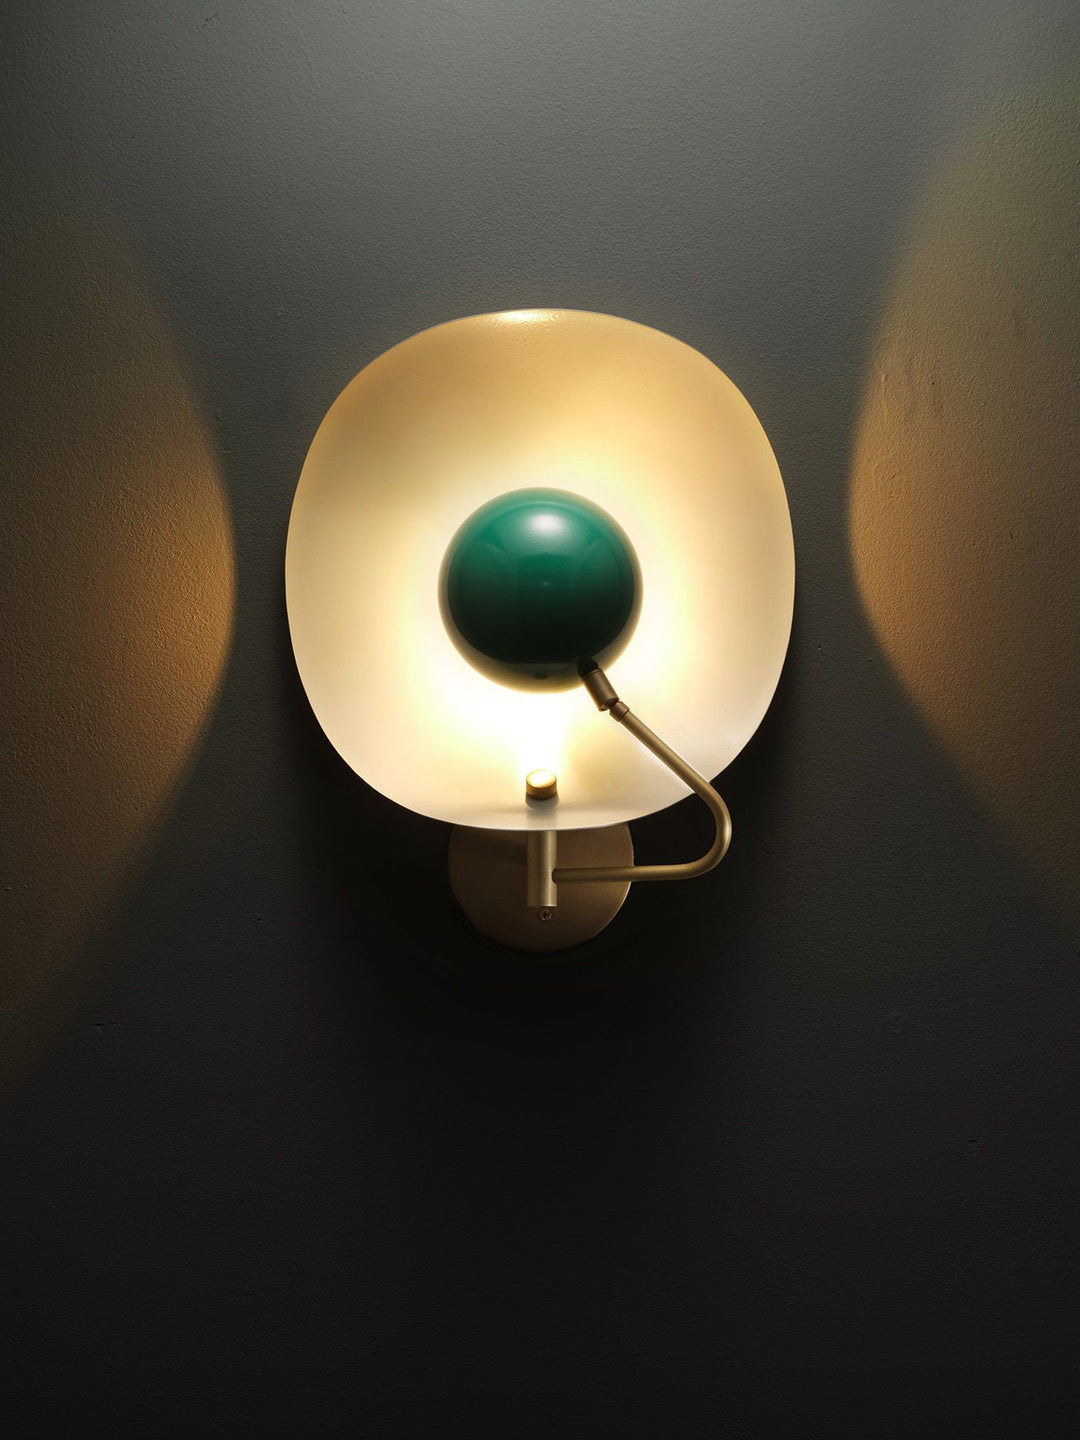 Jenny Wall Sconce (Perfect White, Paris Green, Natural Brass)